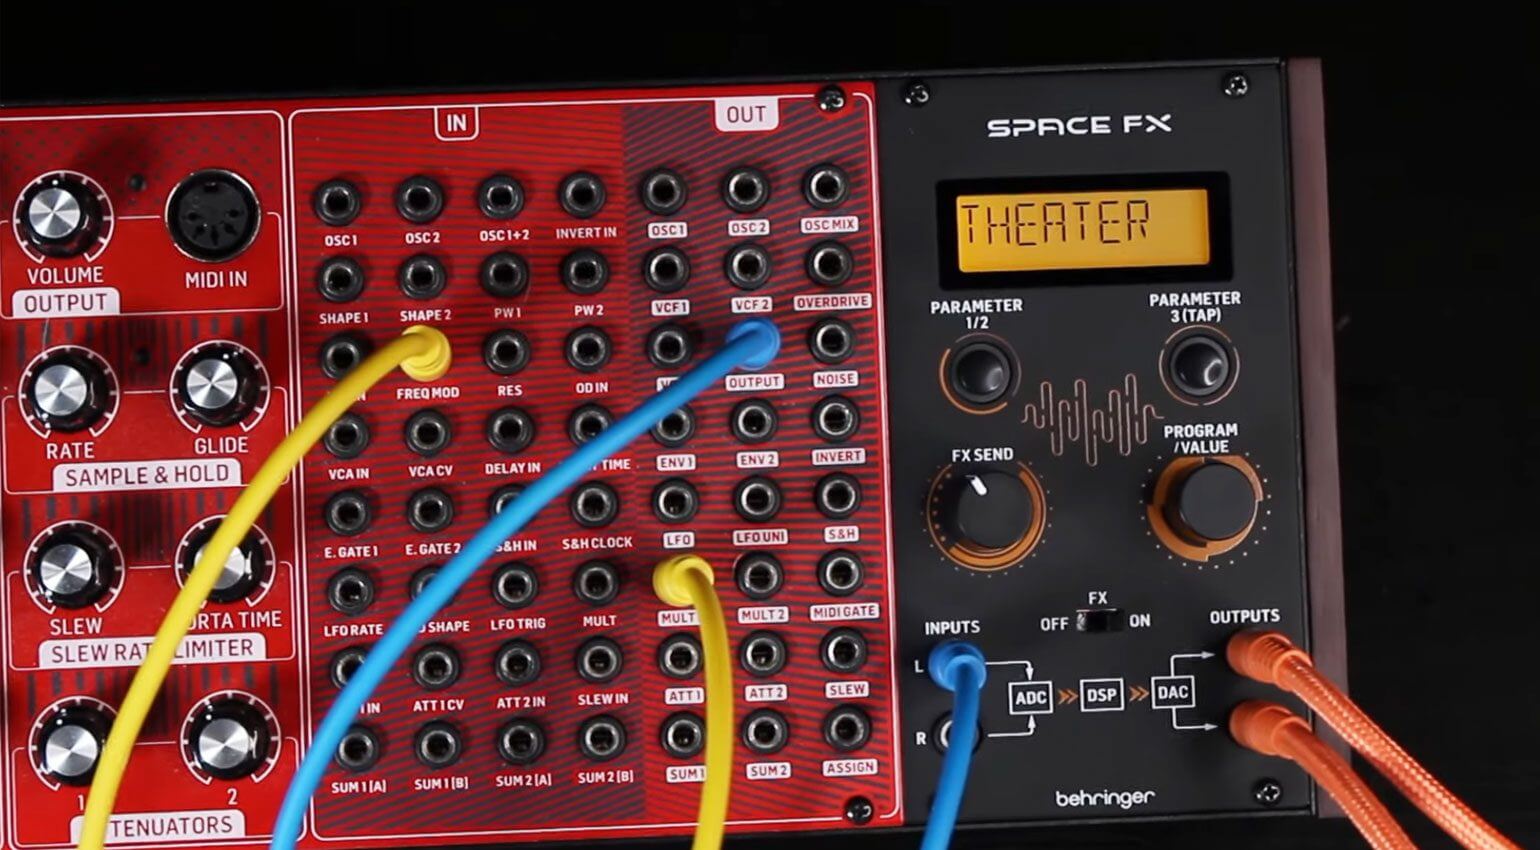 Behringer SPACE FX features no CV (control voltage) input for power, meaning the module is entirely digital. As a result, Behringer's new effect module has a simple interface. The tap tempo is useful for the purpose it serves, but a Clock input may be more useful for time-based effects in a Eurorack. 